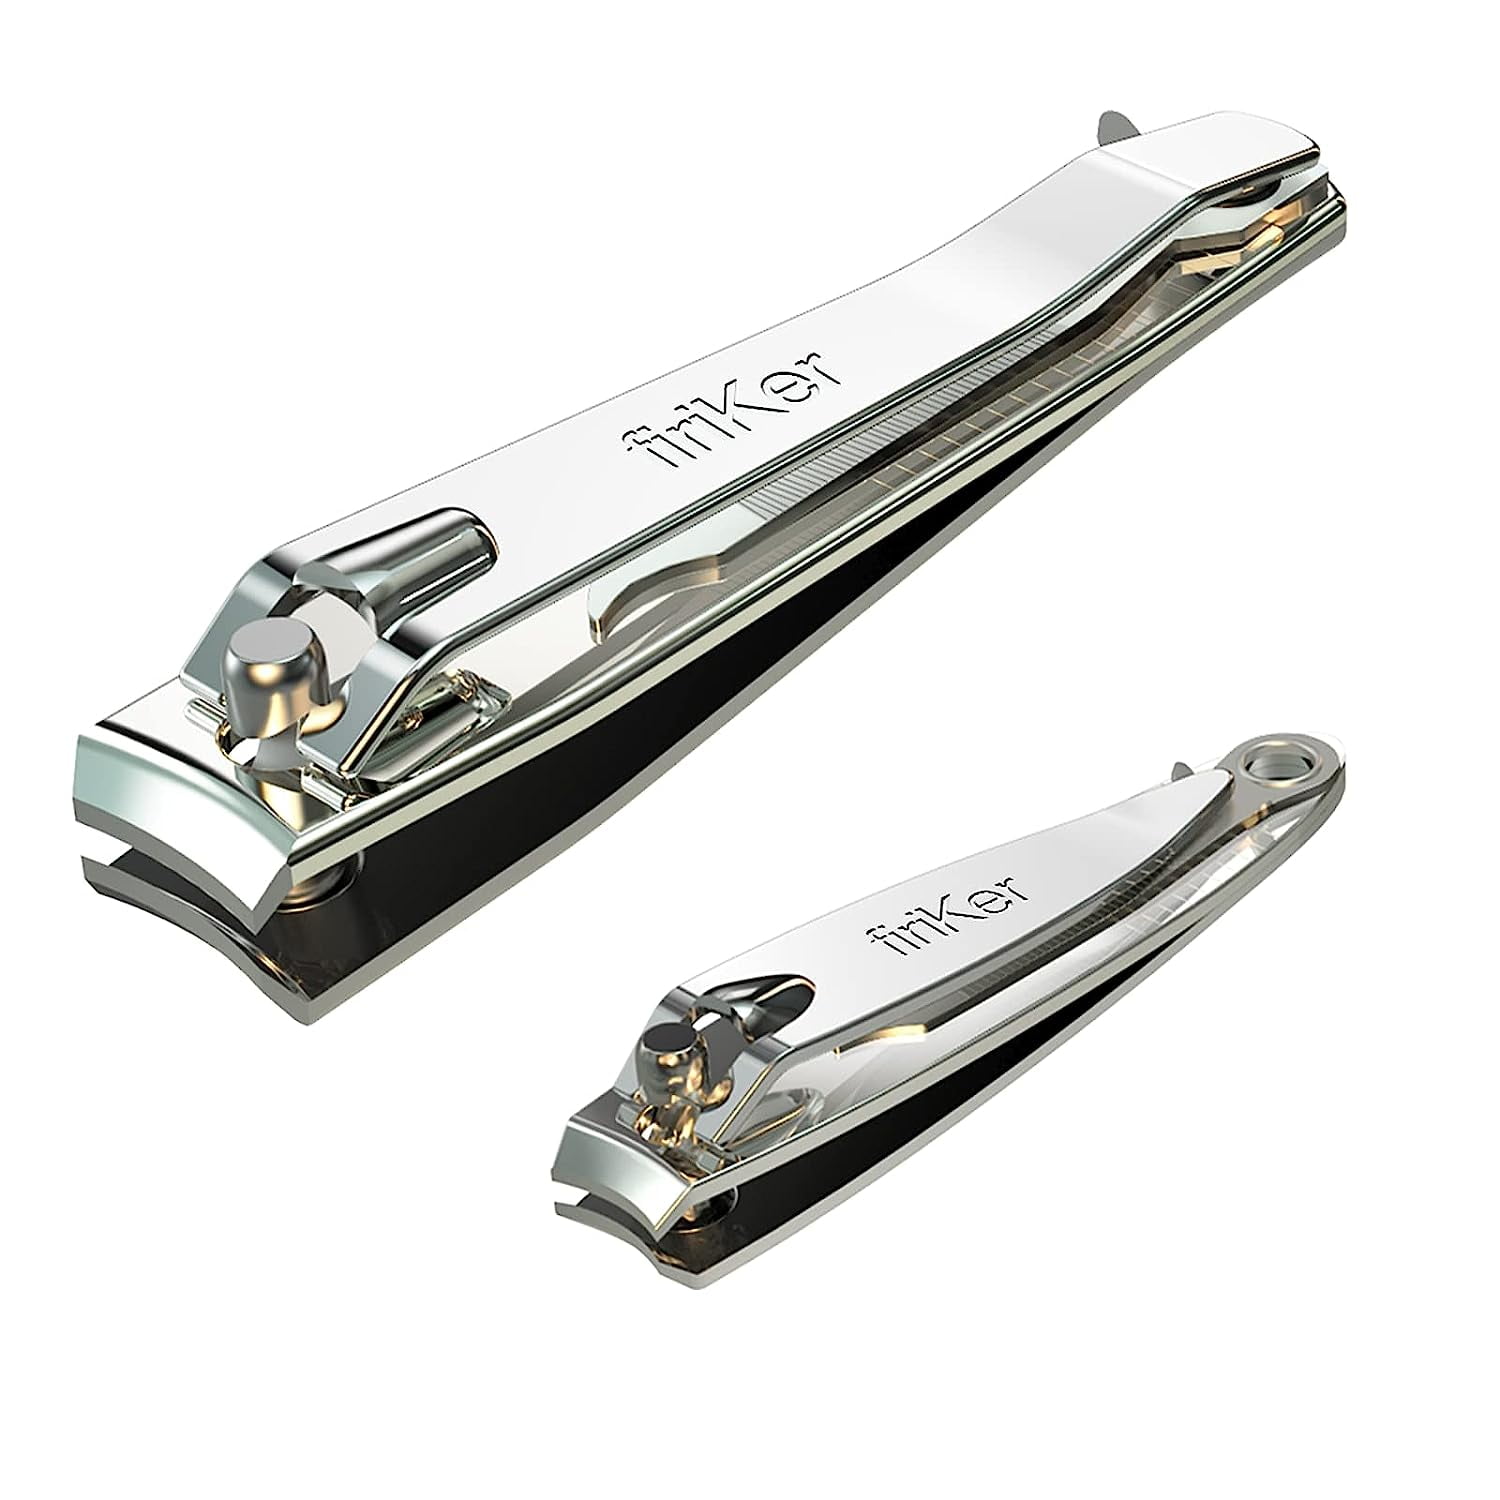 Nail clippers that curve outwards : r/HelpMeFind